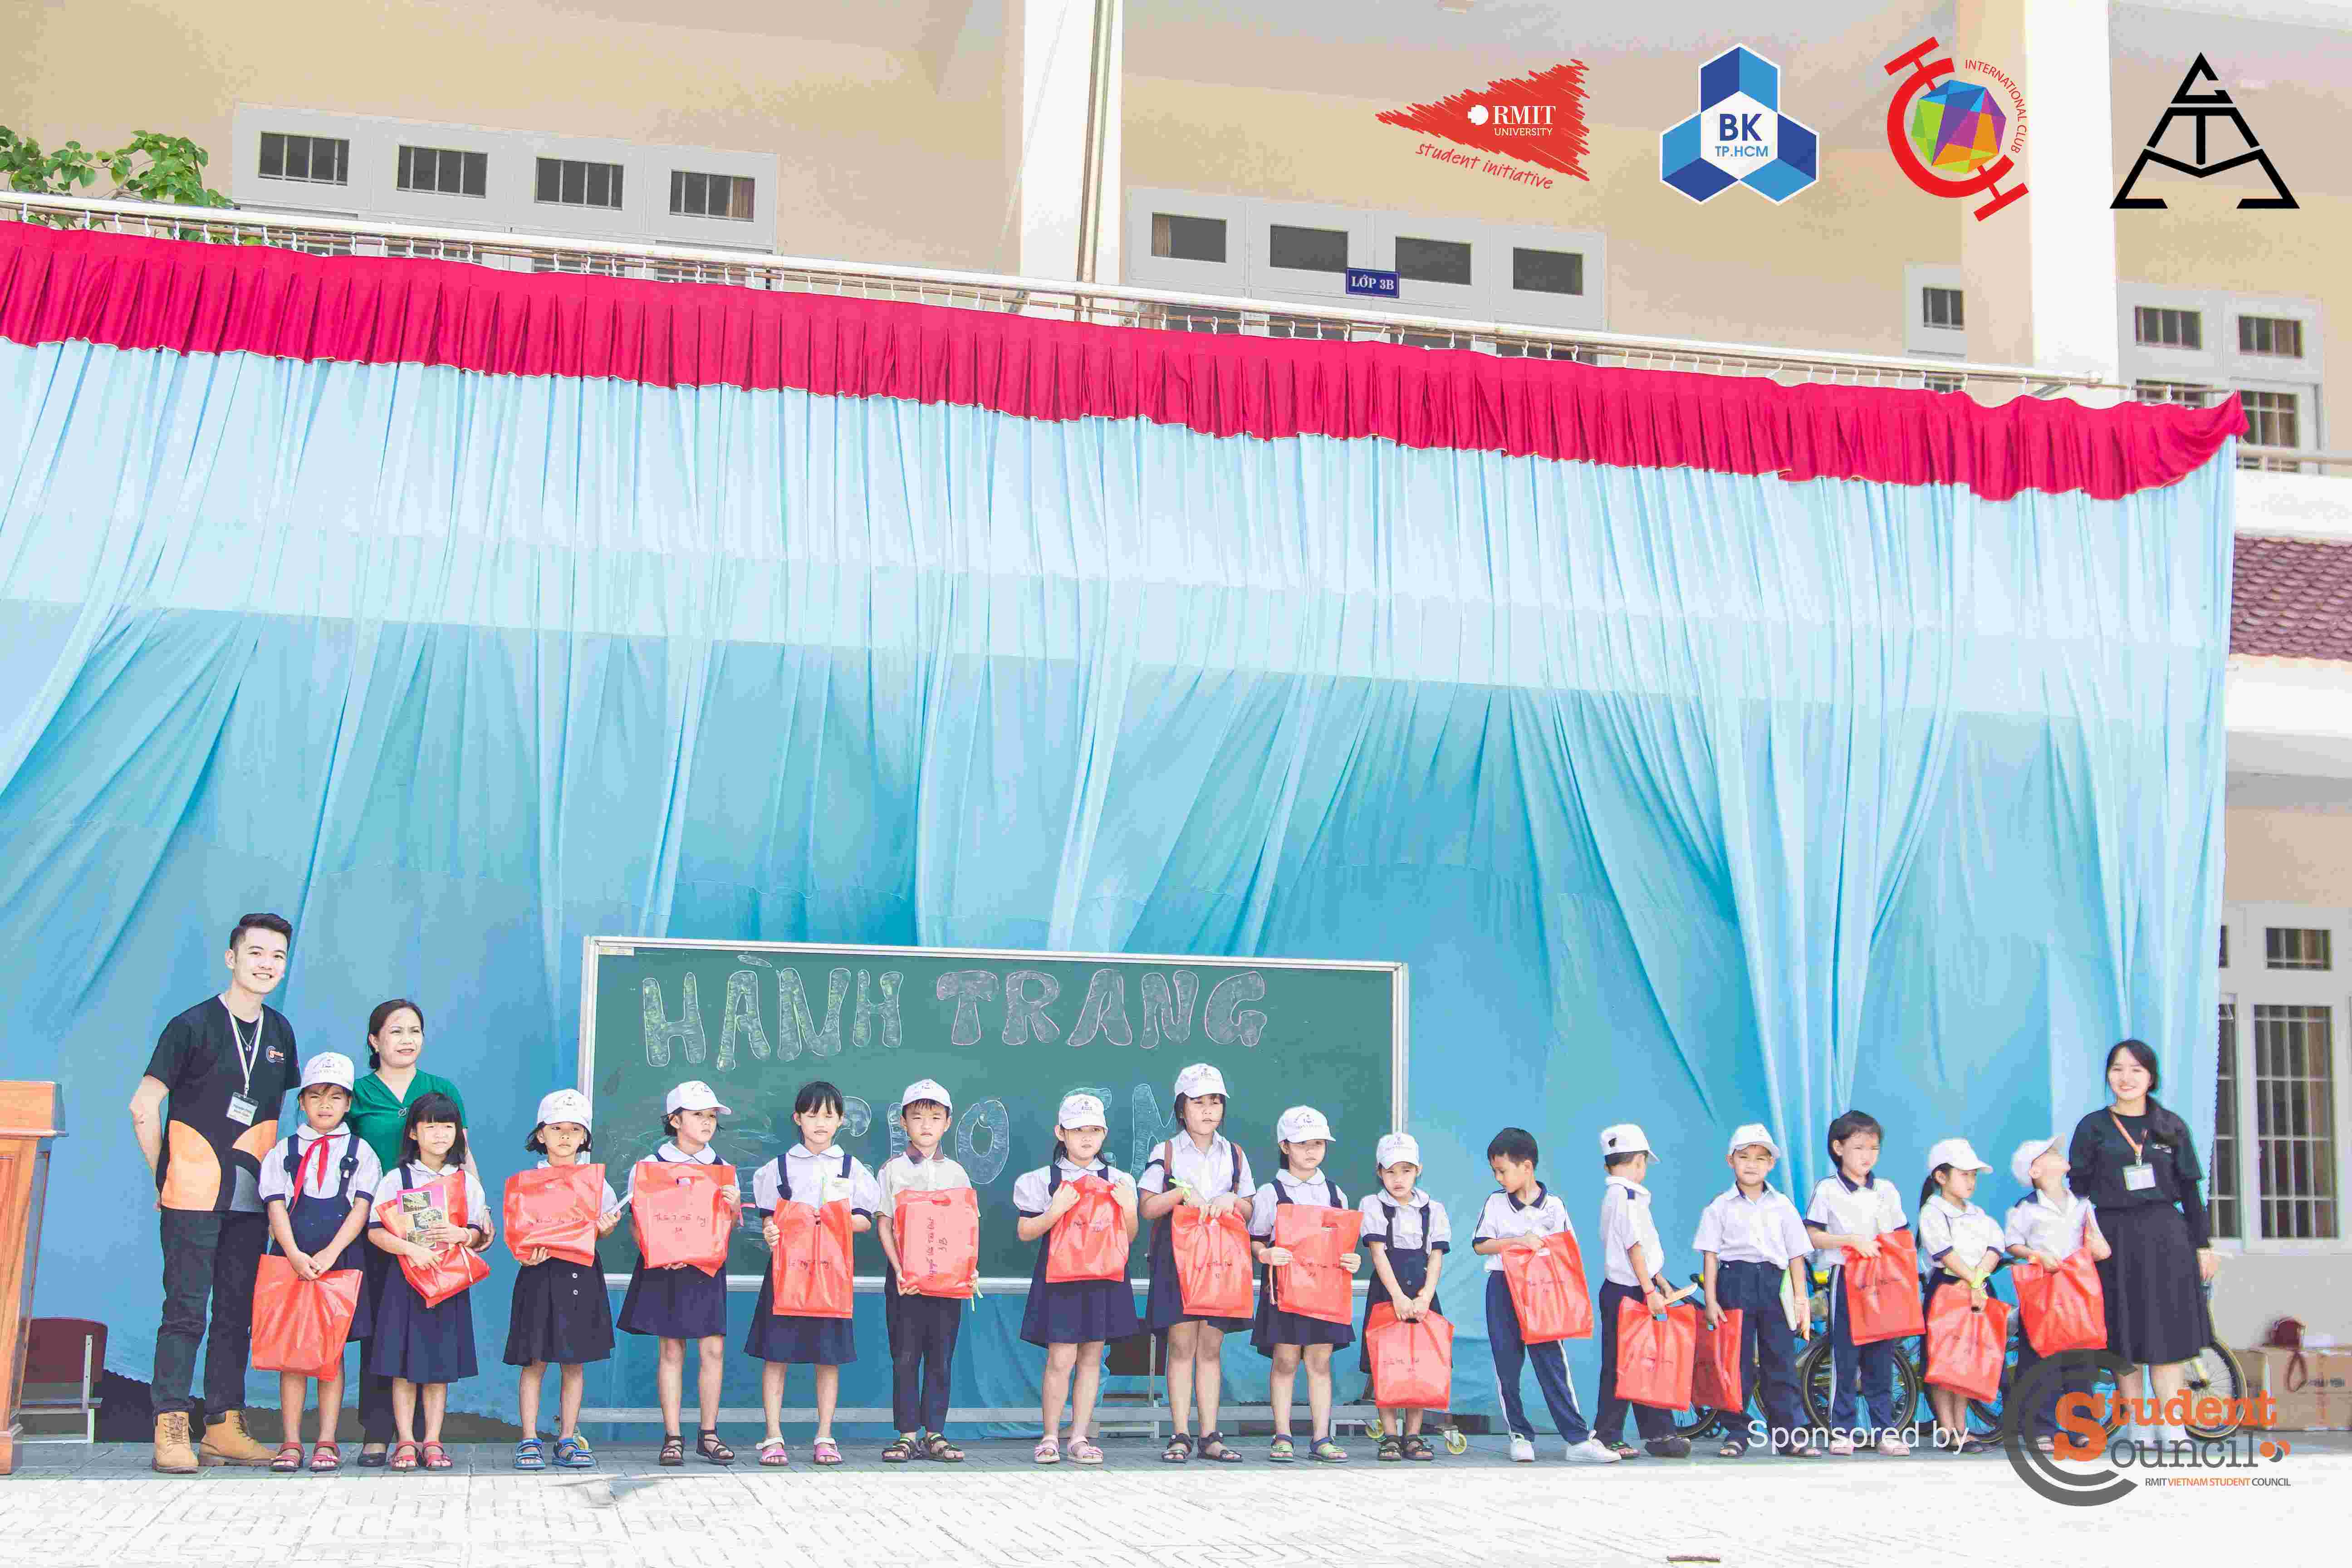 More than 350 new notebooks were given out to 150 primary school pupils. 